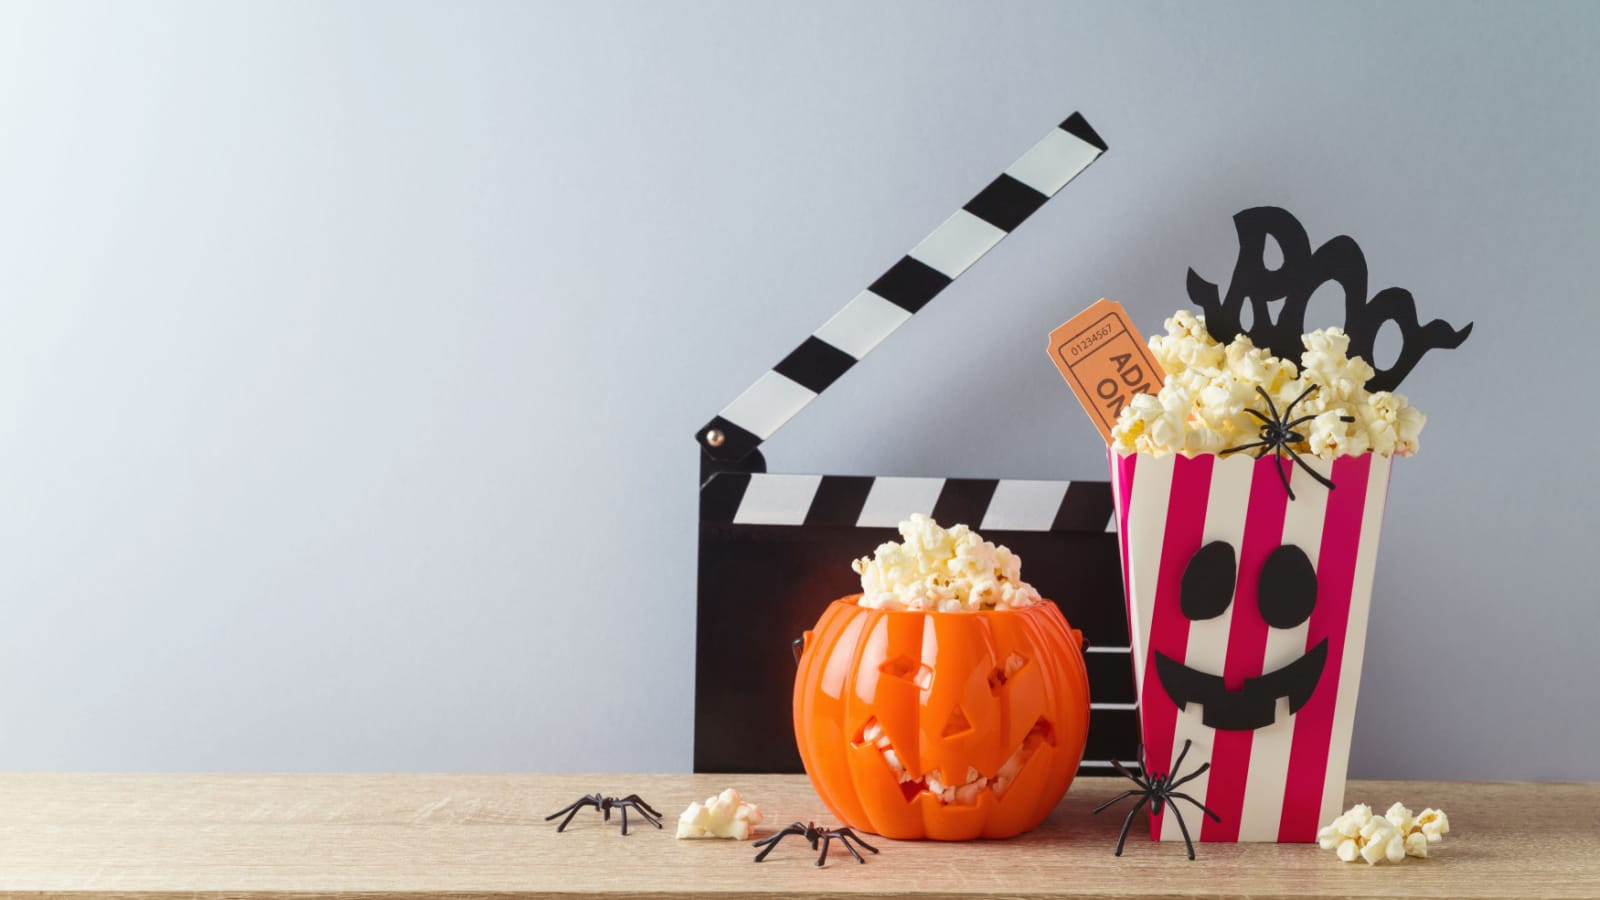 Horror movie night and Halloween party concept with jack o lantern pumpkin, popcorn and movie clapperboard on wooden table